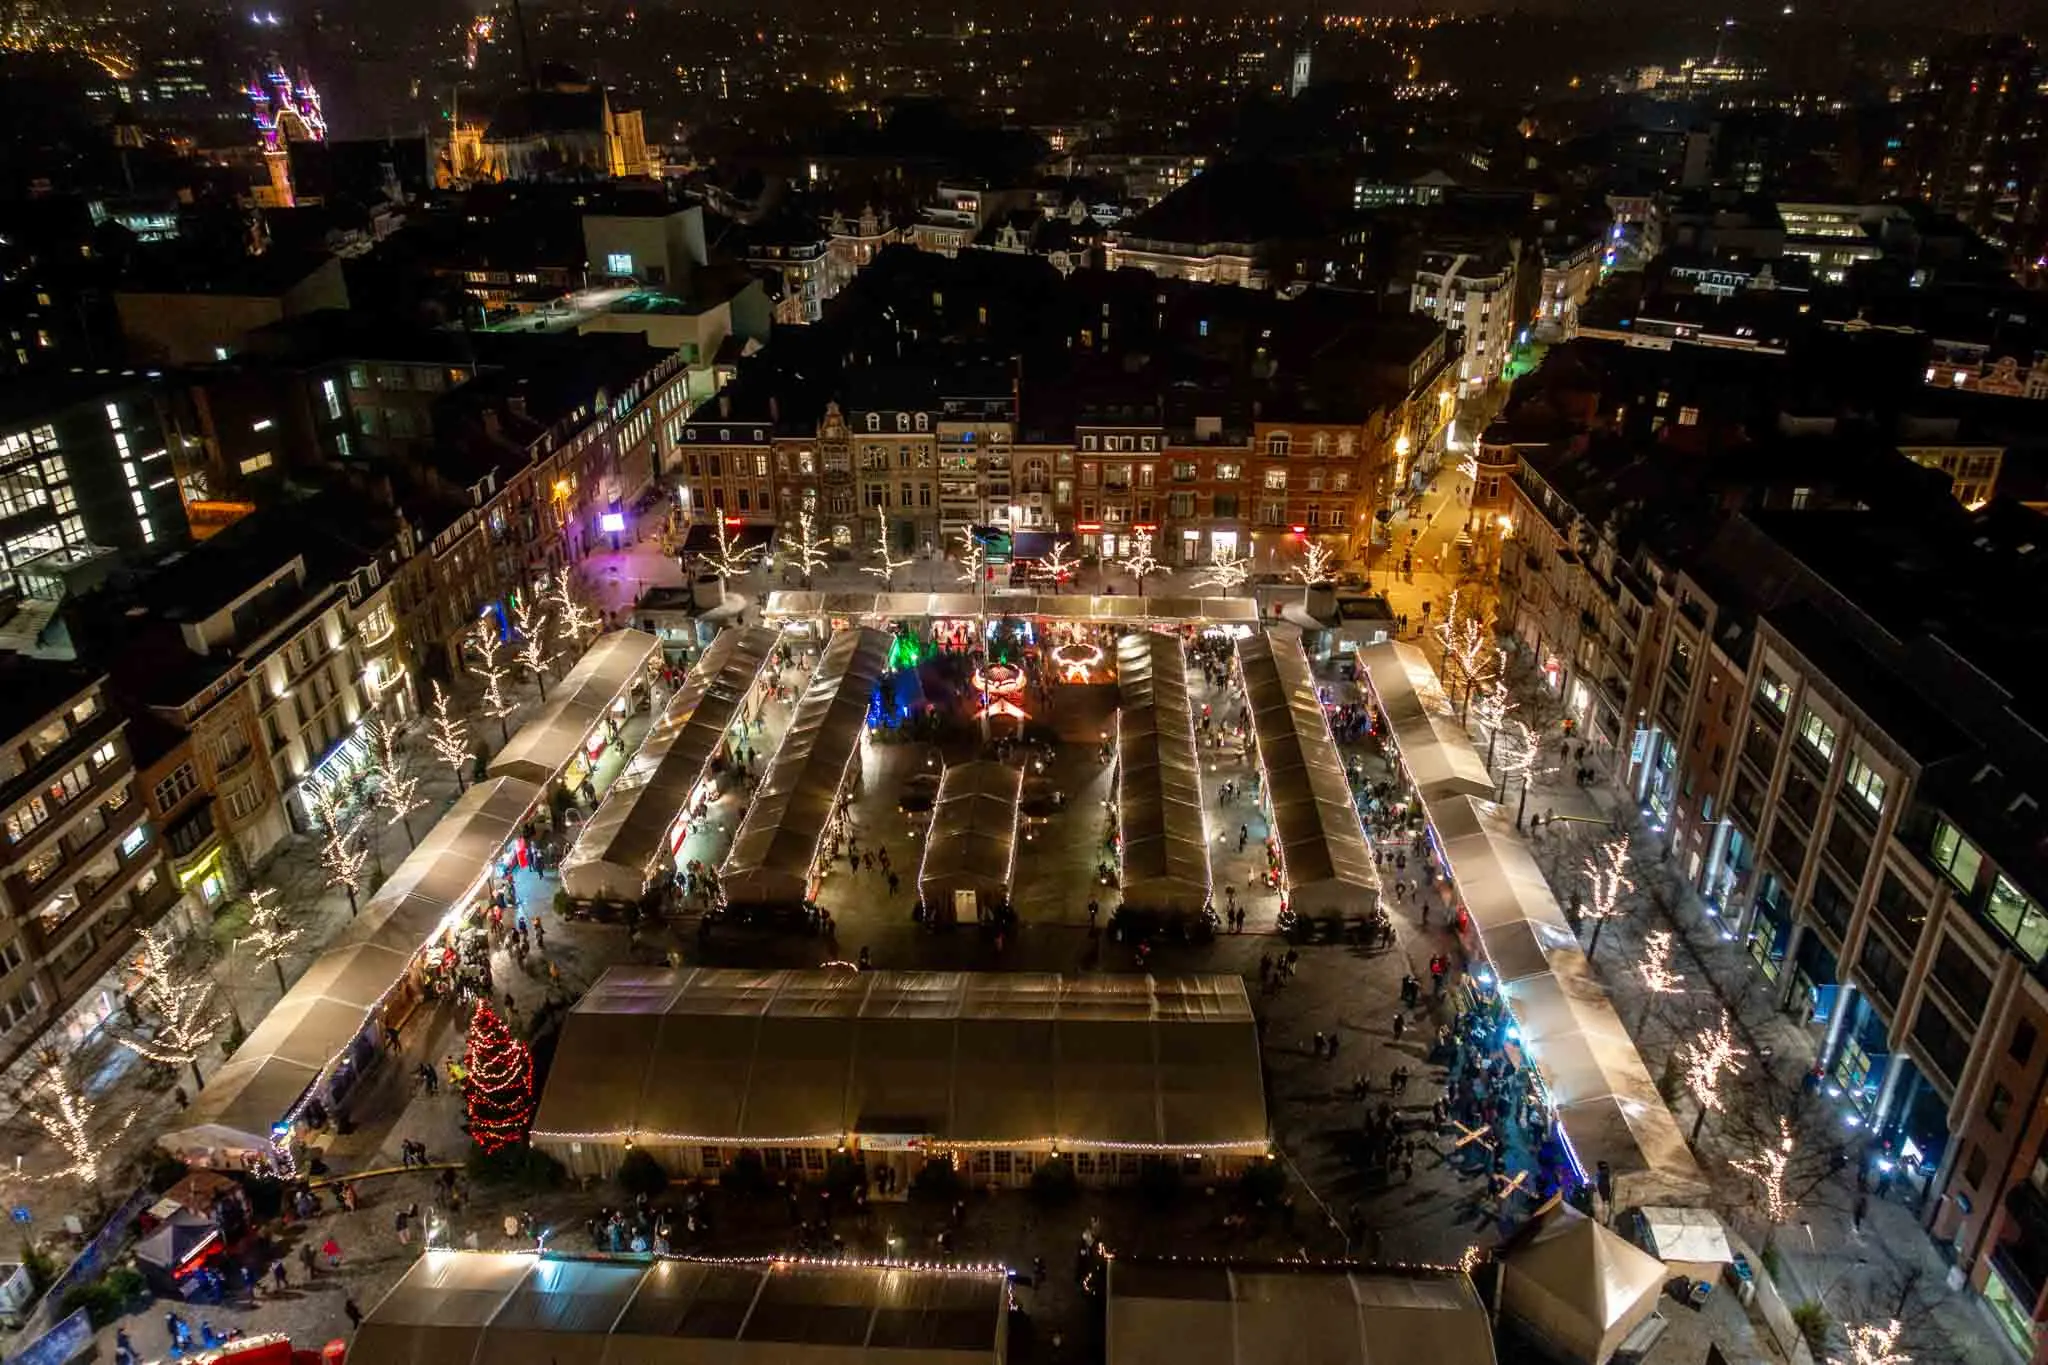 Overhead view of the stalls of the Leuven Christmas market